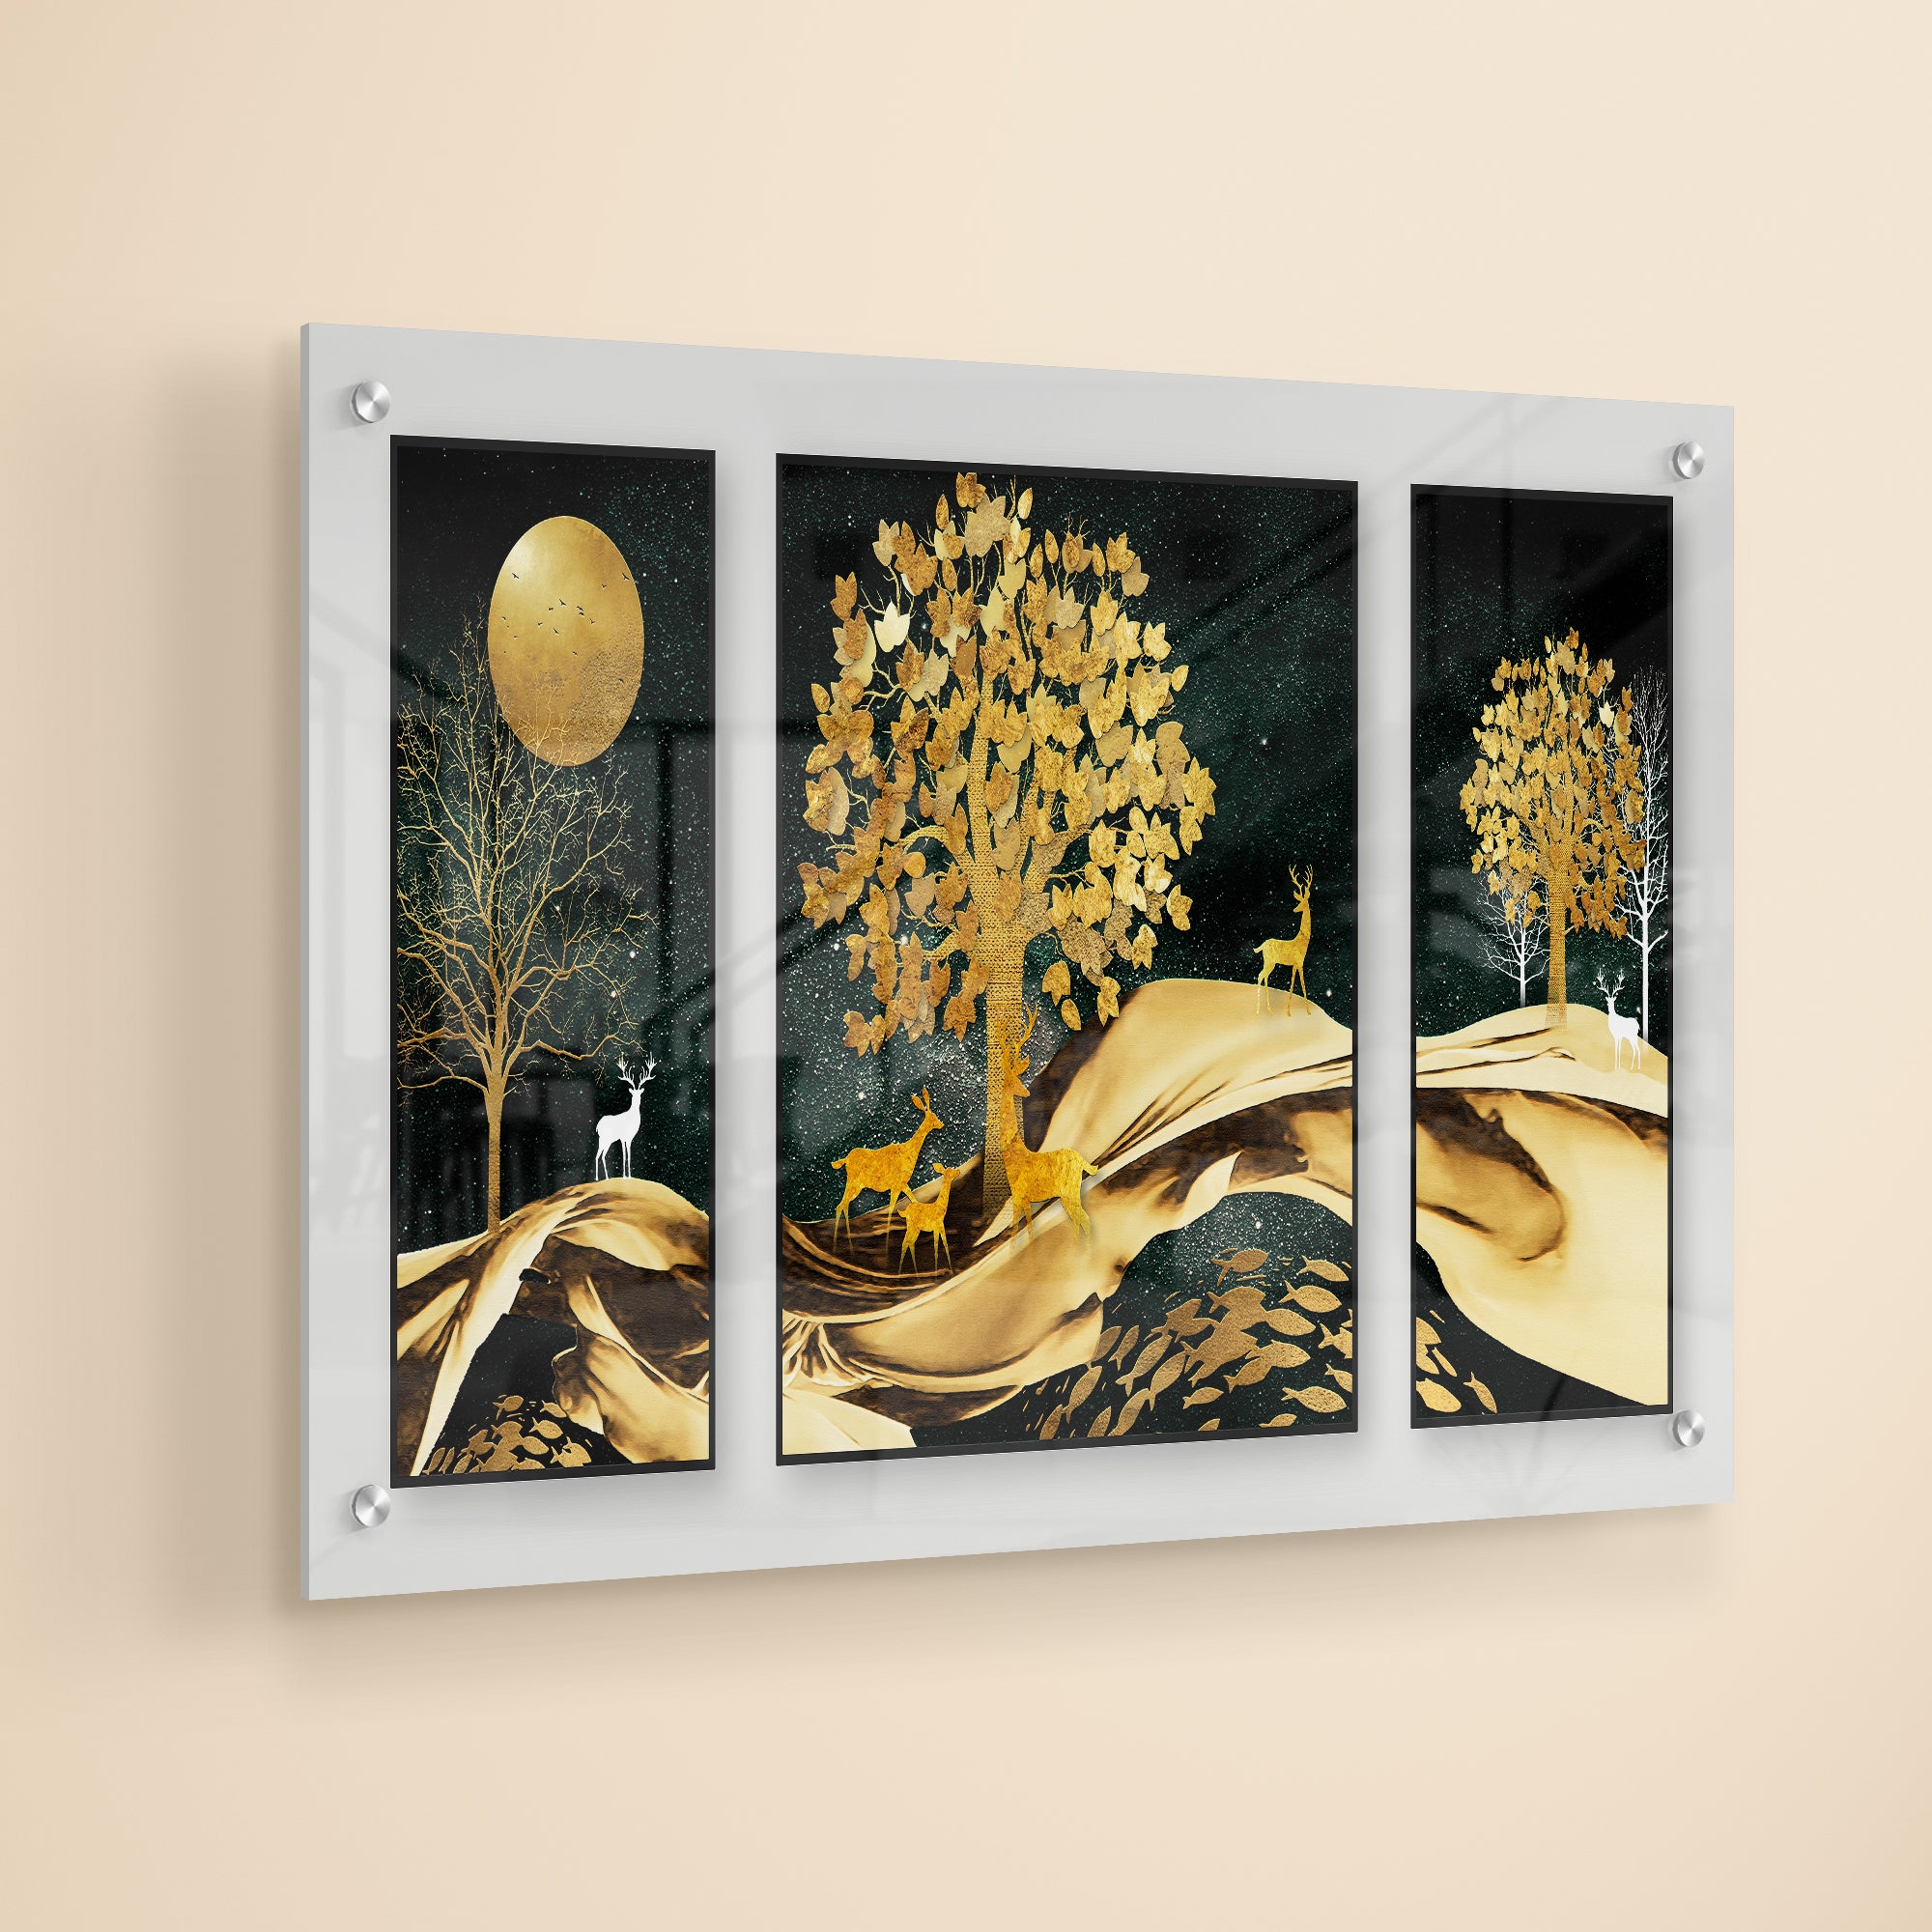 Golden Mountain And Tree With Deer And Fish Acrylic Wall Painting